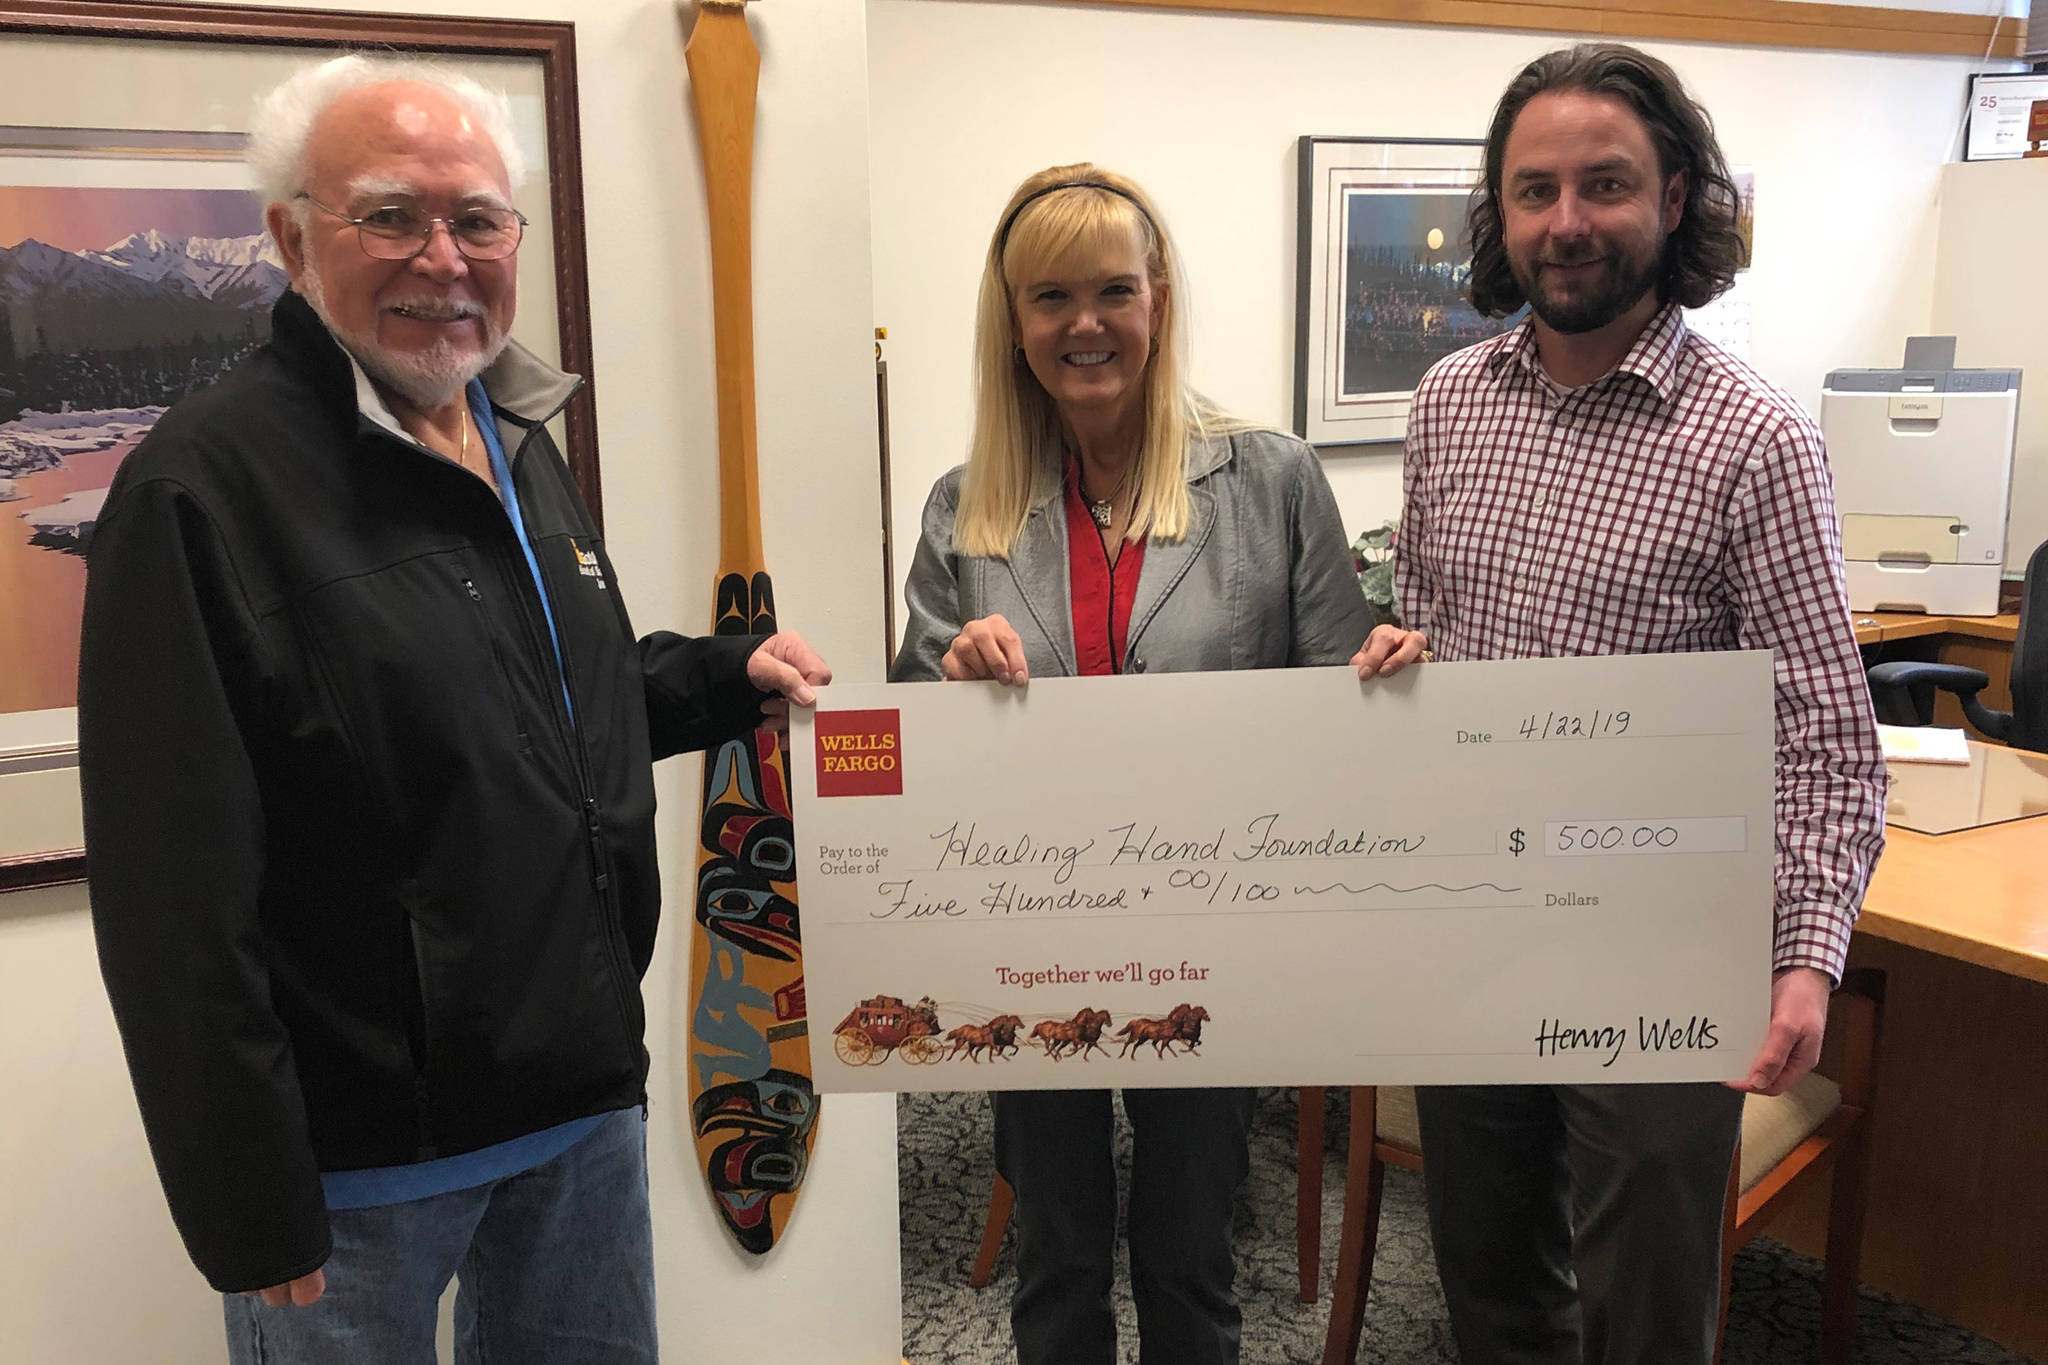 The Healing Hand Foundation recently received a $500 donation from Wells Fargo bank. The donation was presented by Karen West, Wells Fargo vice president, center, and Patrick Ryland, senior business relationship manager, right, to Joe Kahklen, left, board president of the Healing Hand Foundation. (Courtesy Photo)